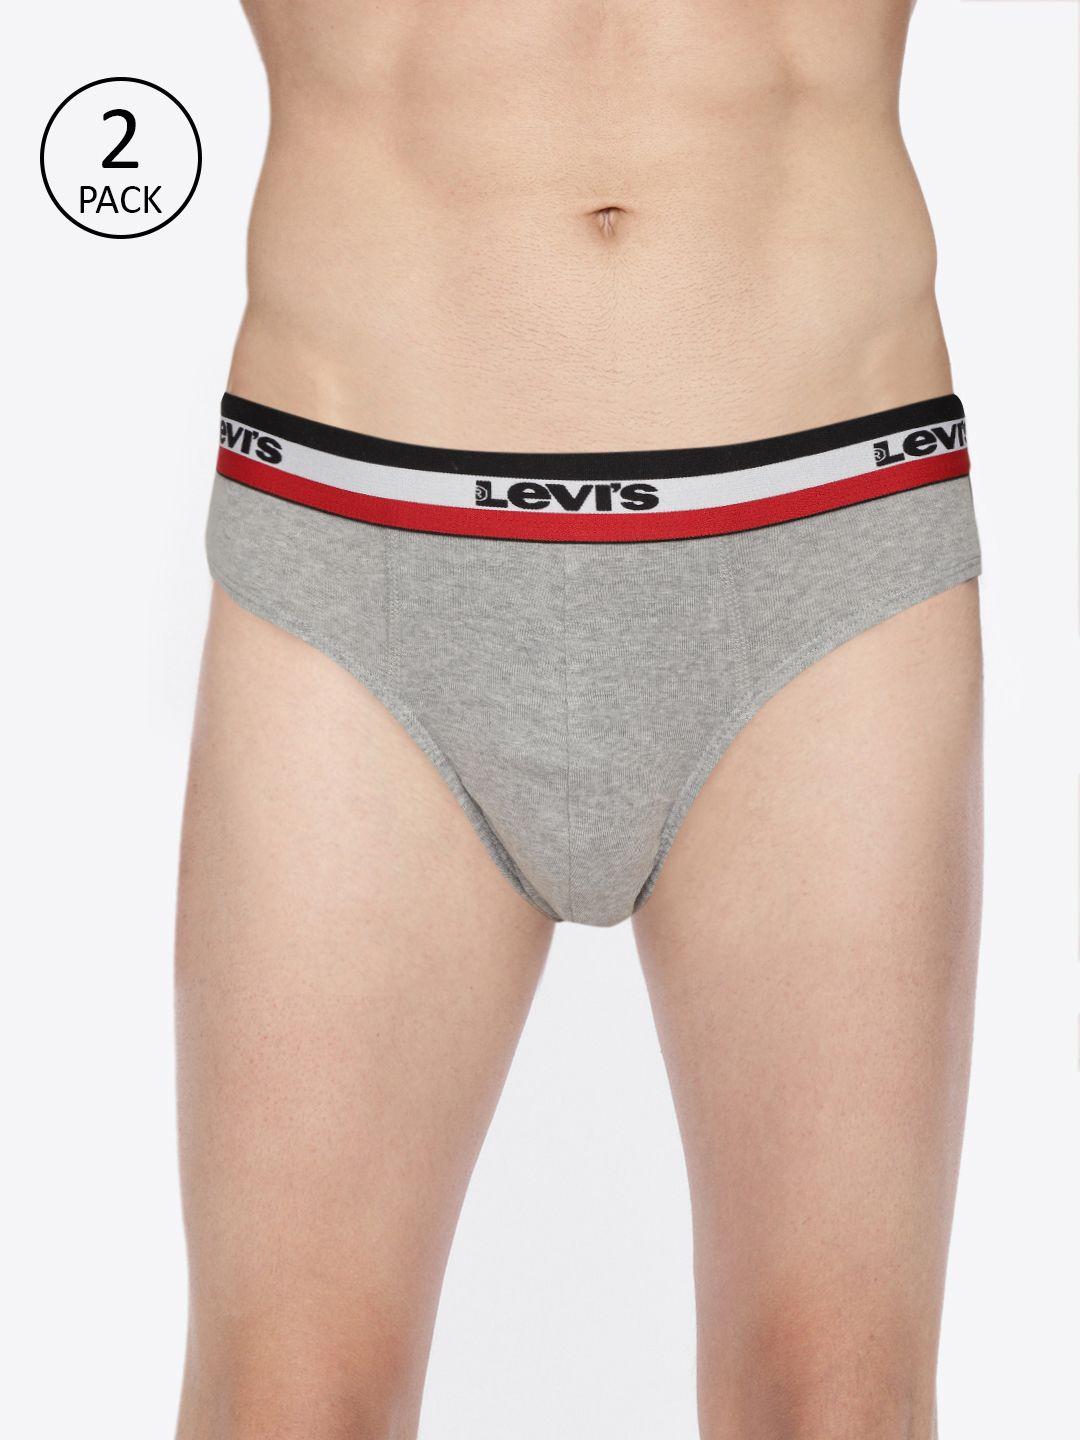 levis-men-pack-of-2-smartskin-technology-cotton-trunks-with-tag-free-comfort-#002